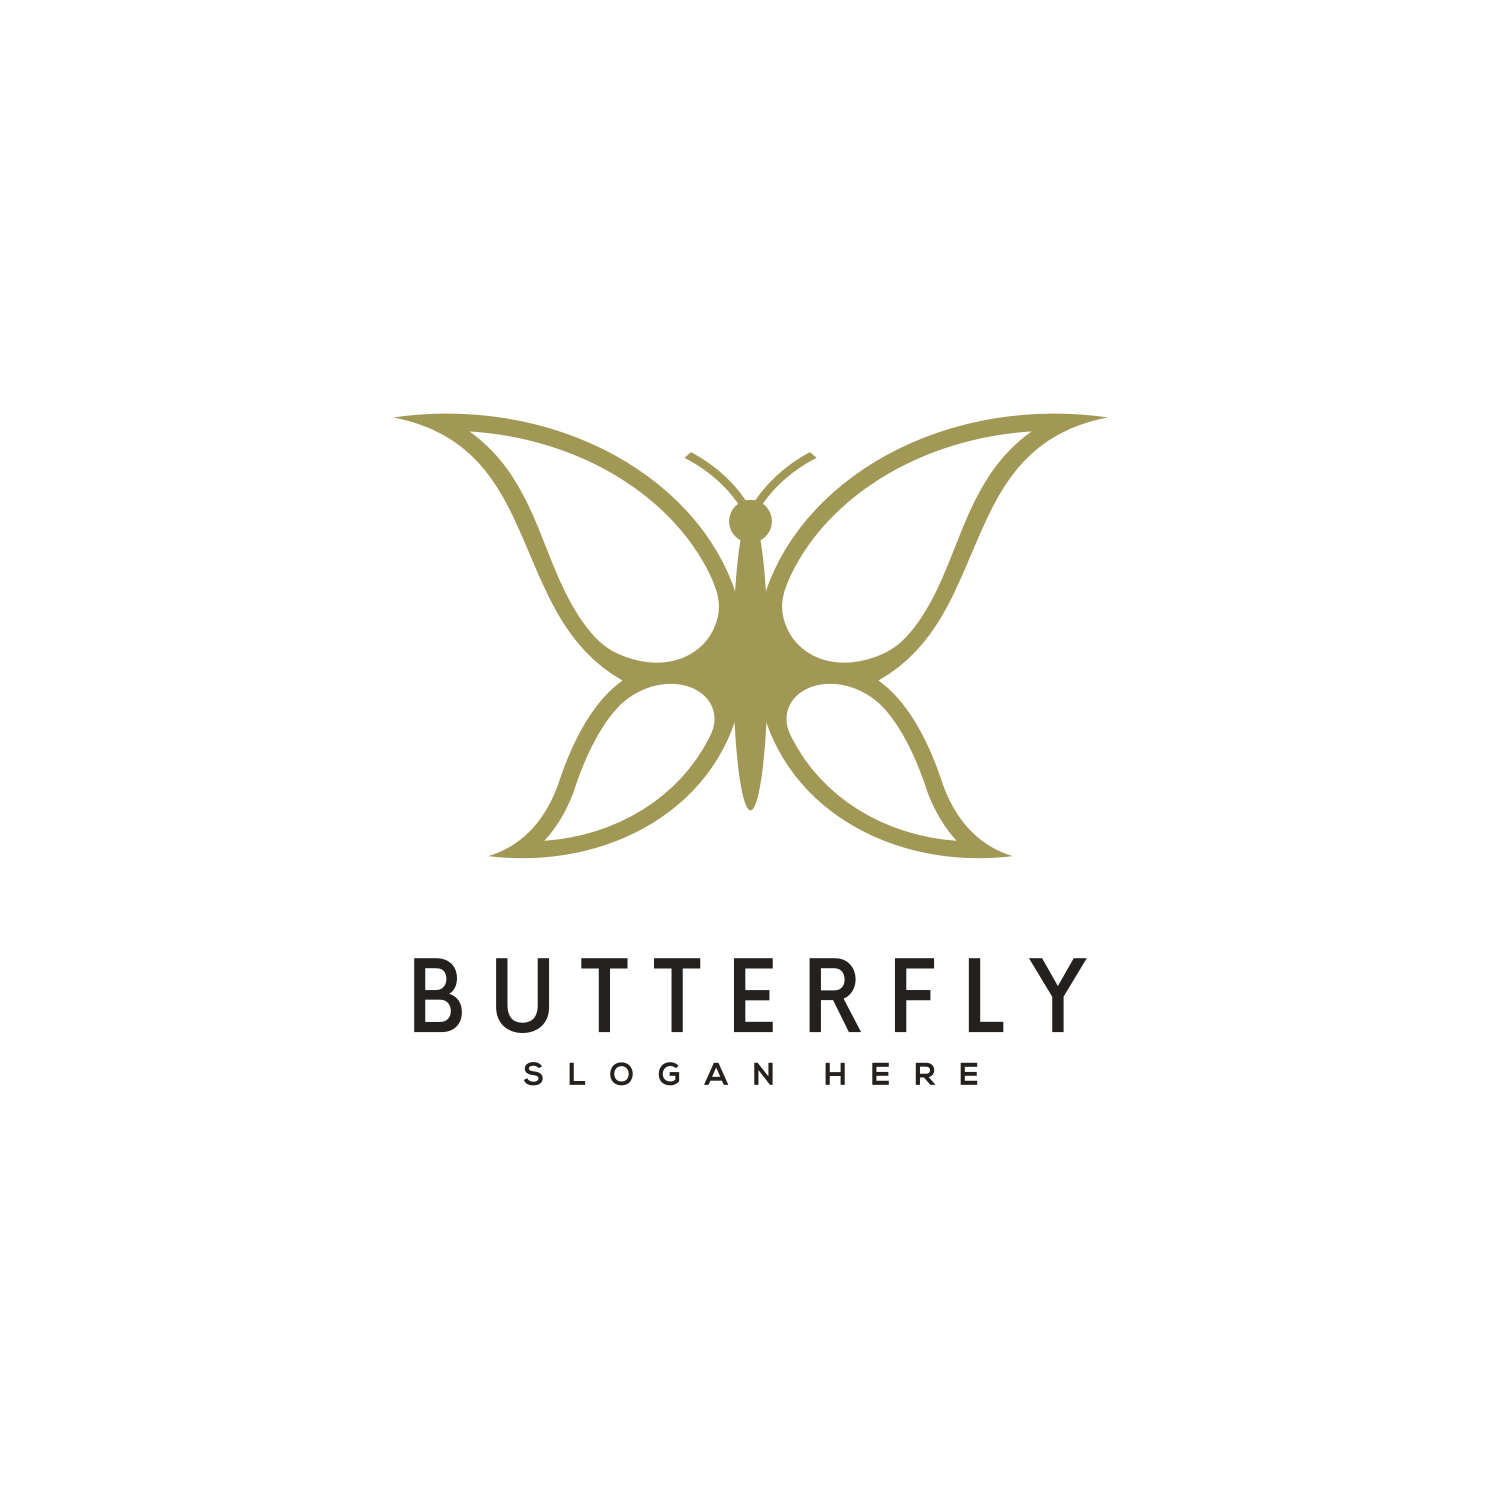 Butterfly Animal Logo Design cover image.